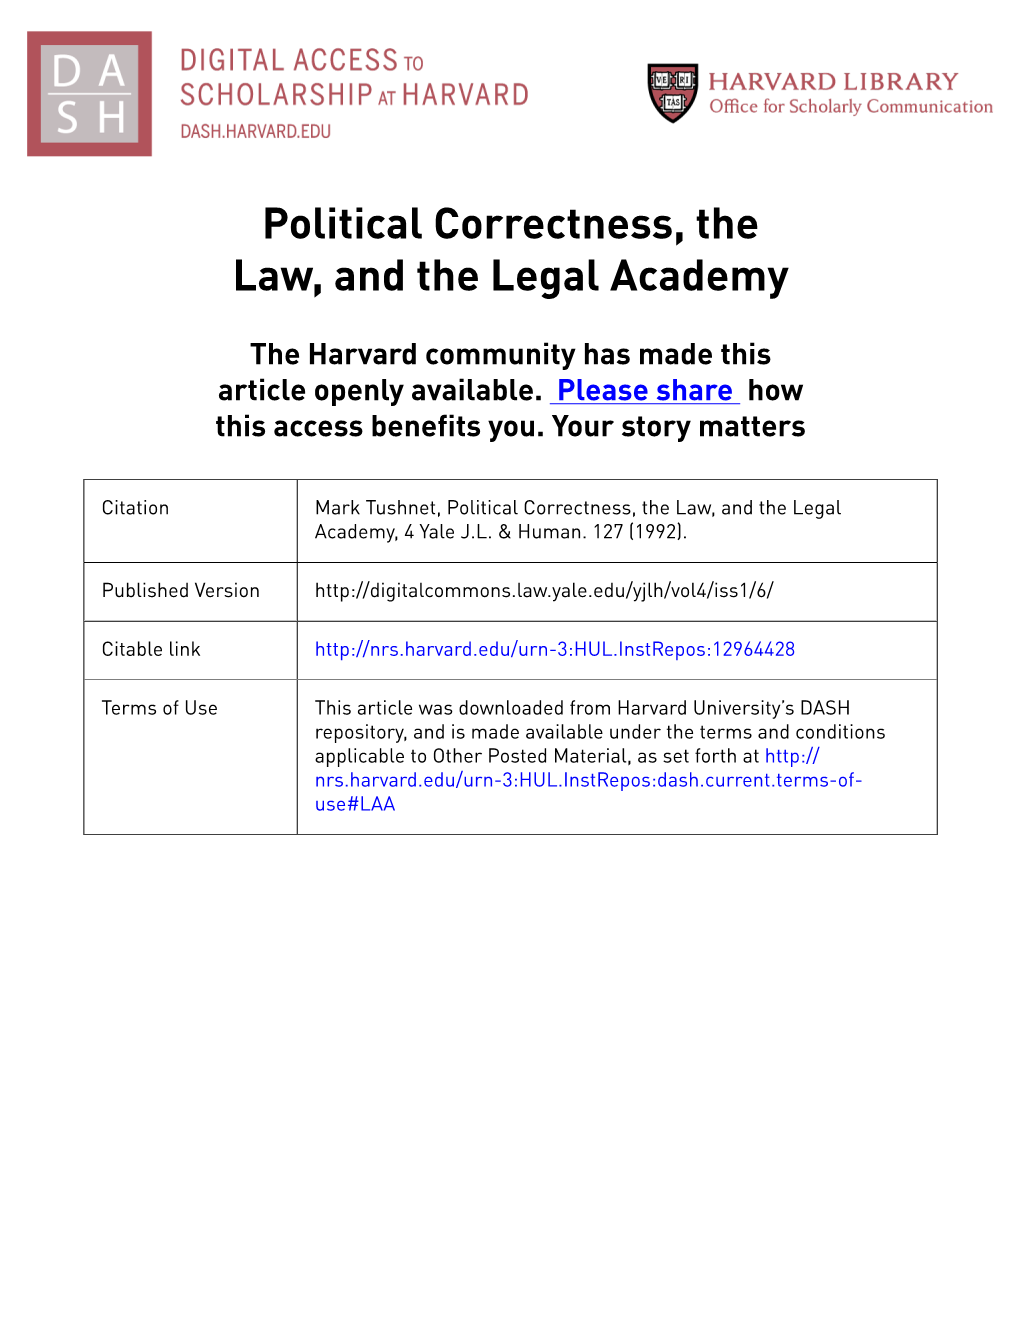 Political Correctness, the Law, and the Legal Academy